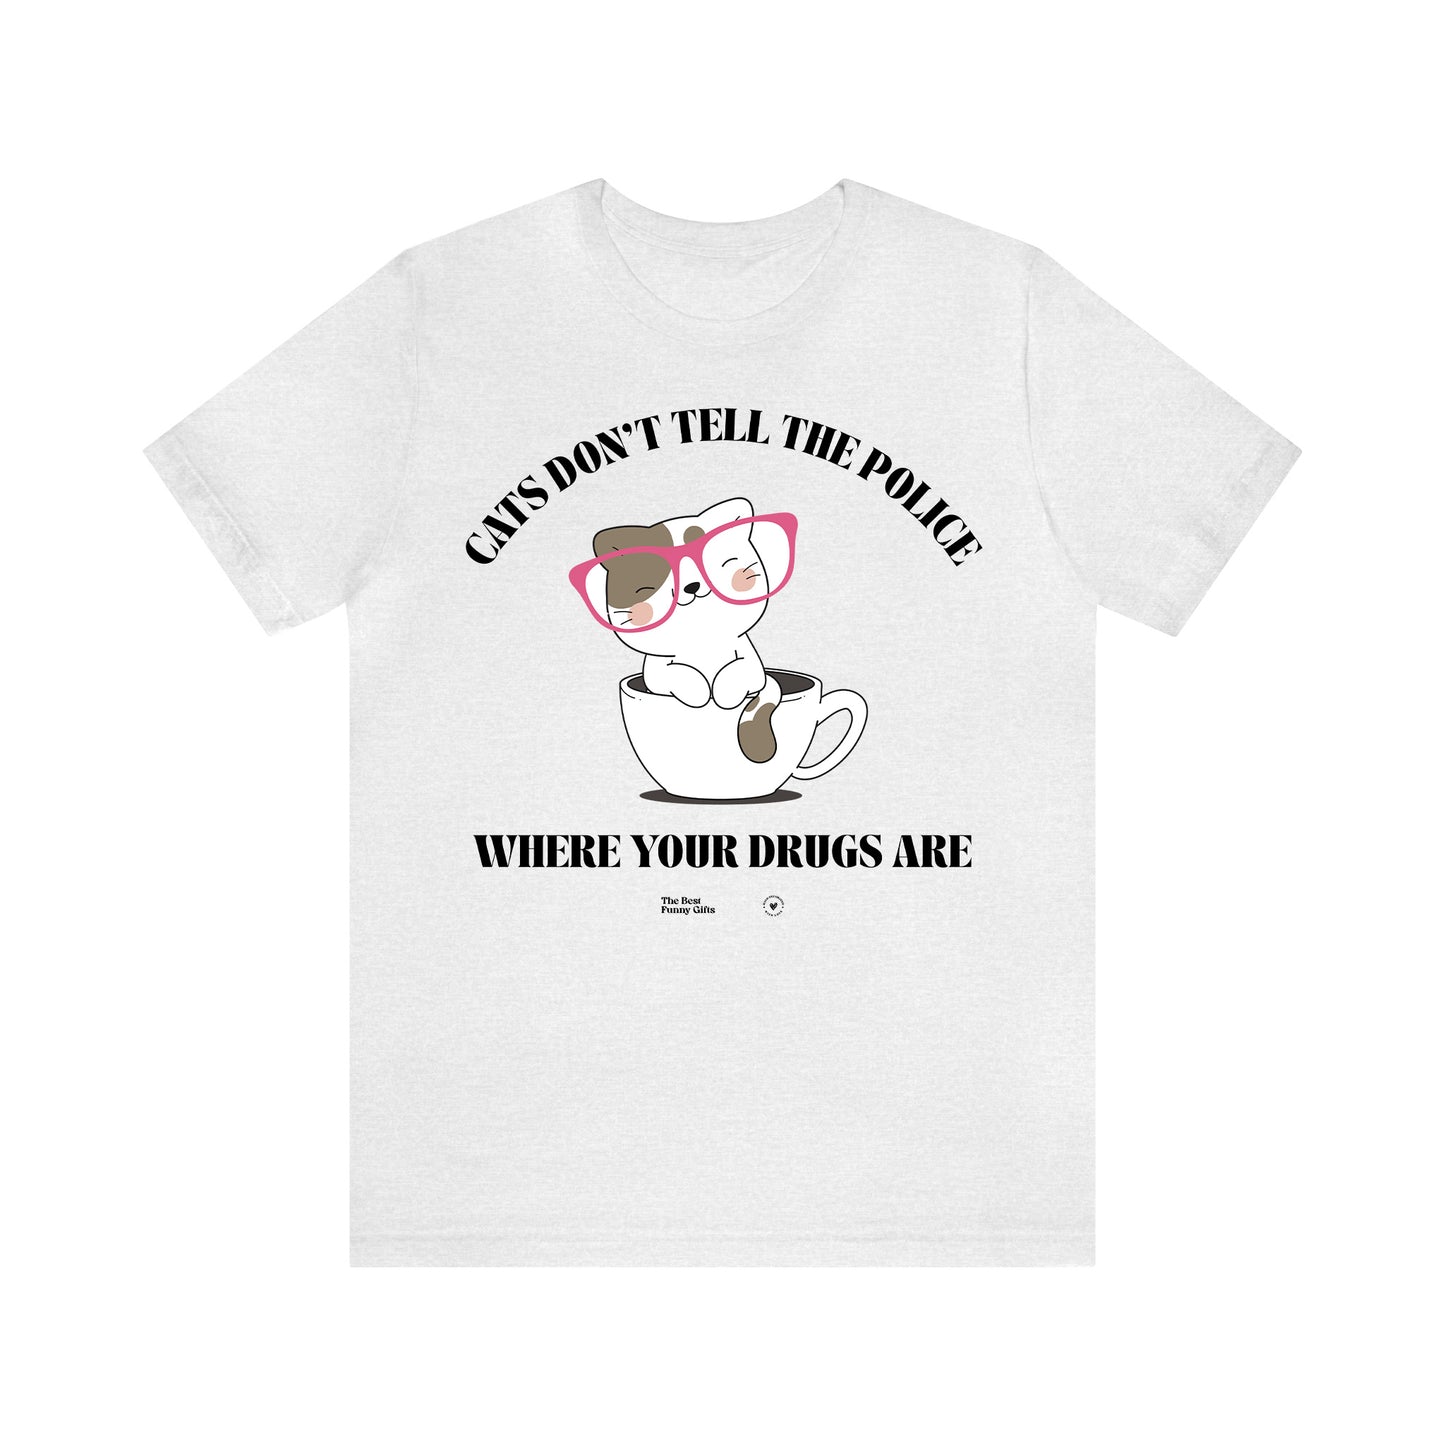 Funny Shirts for Women - Cats Don't Tell the Police Where Your Drugs Are - Women’s T Shirts